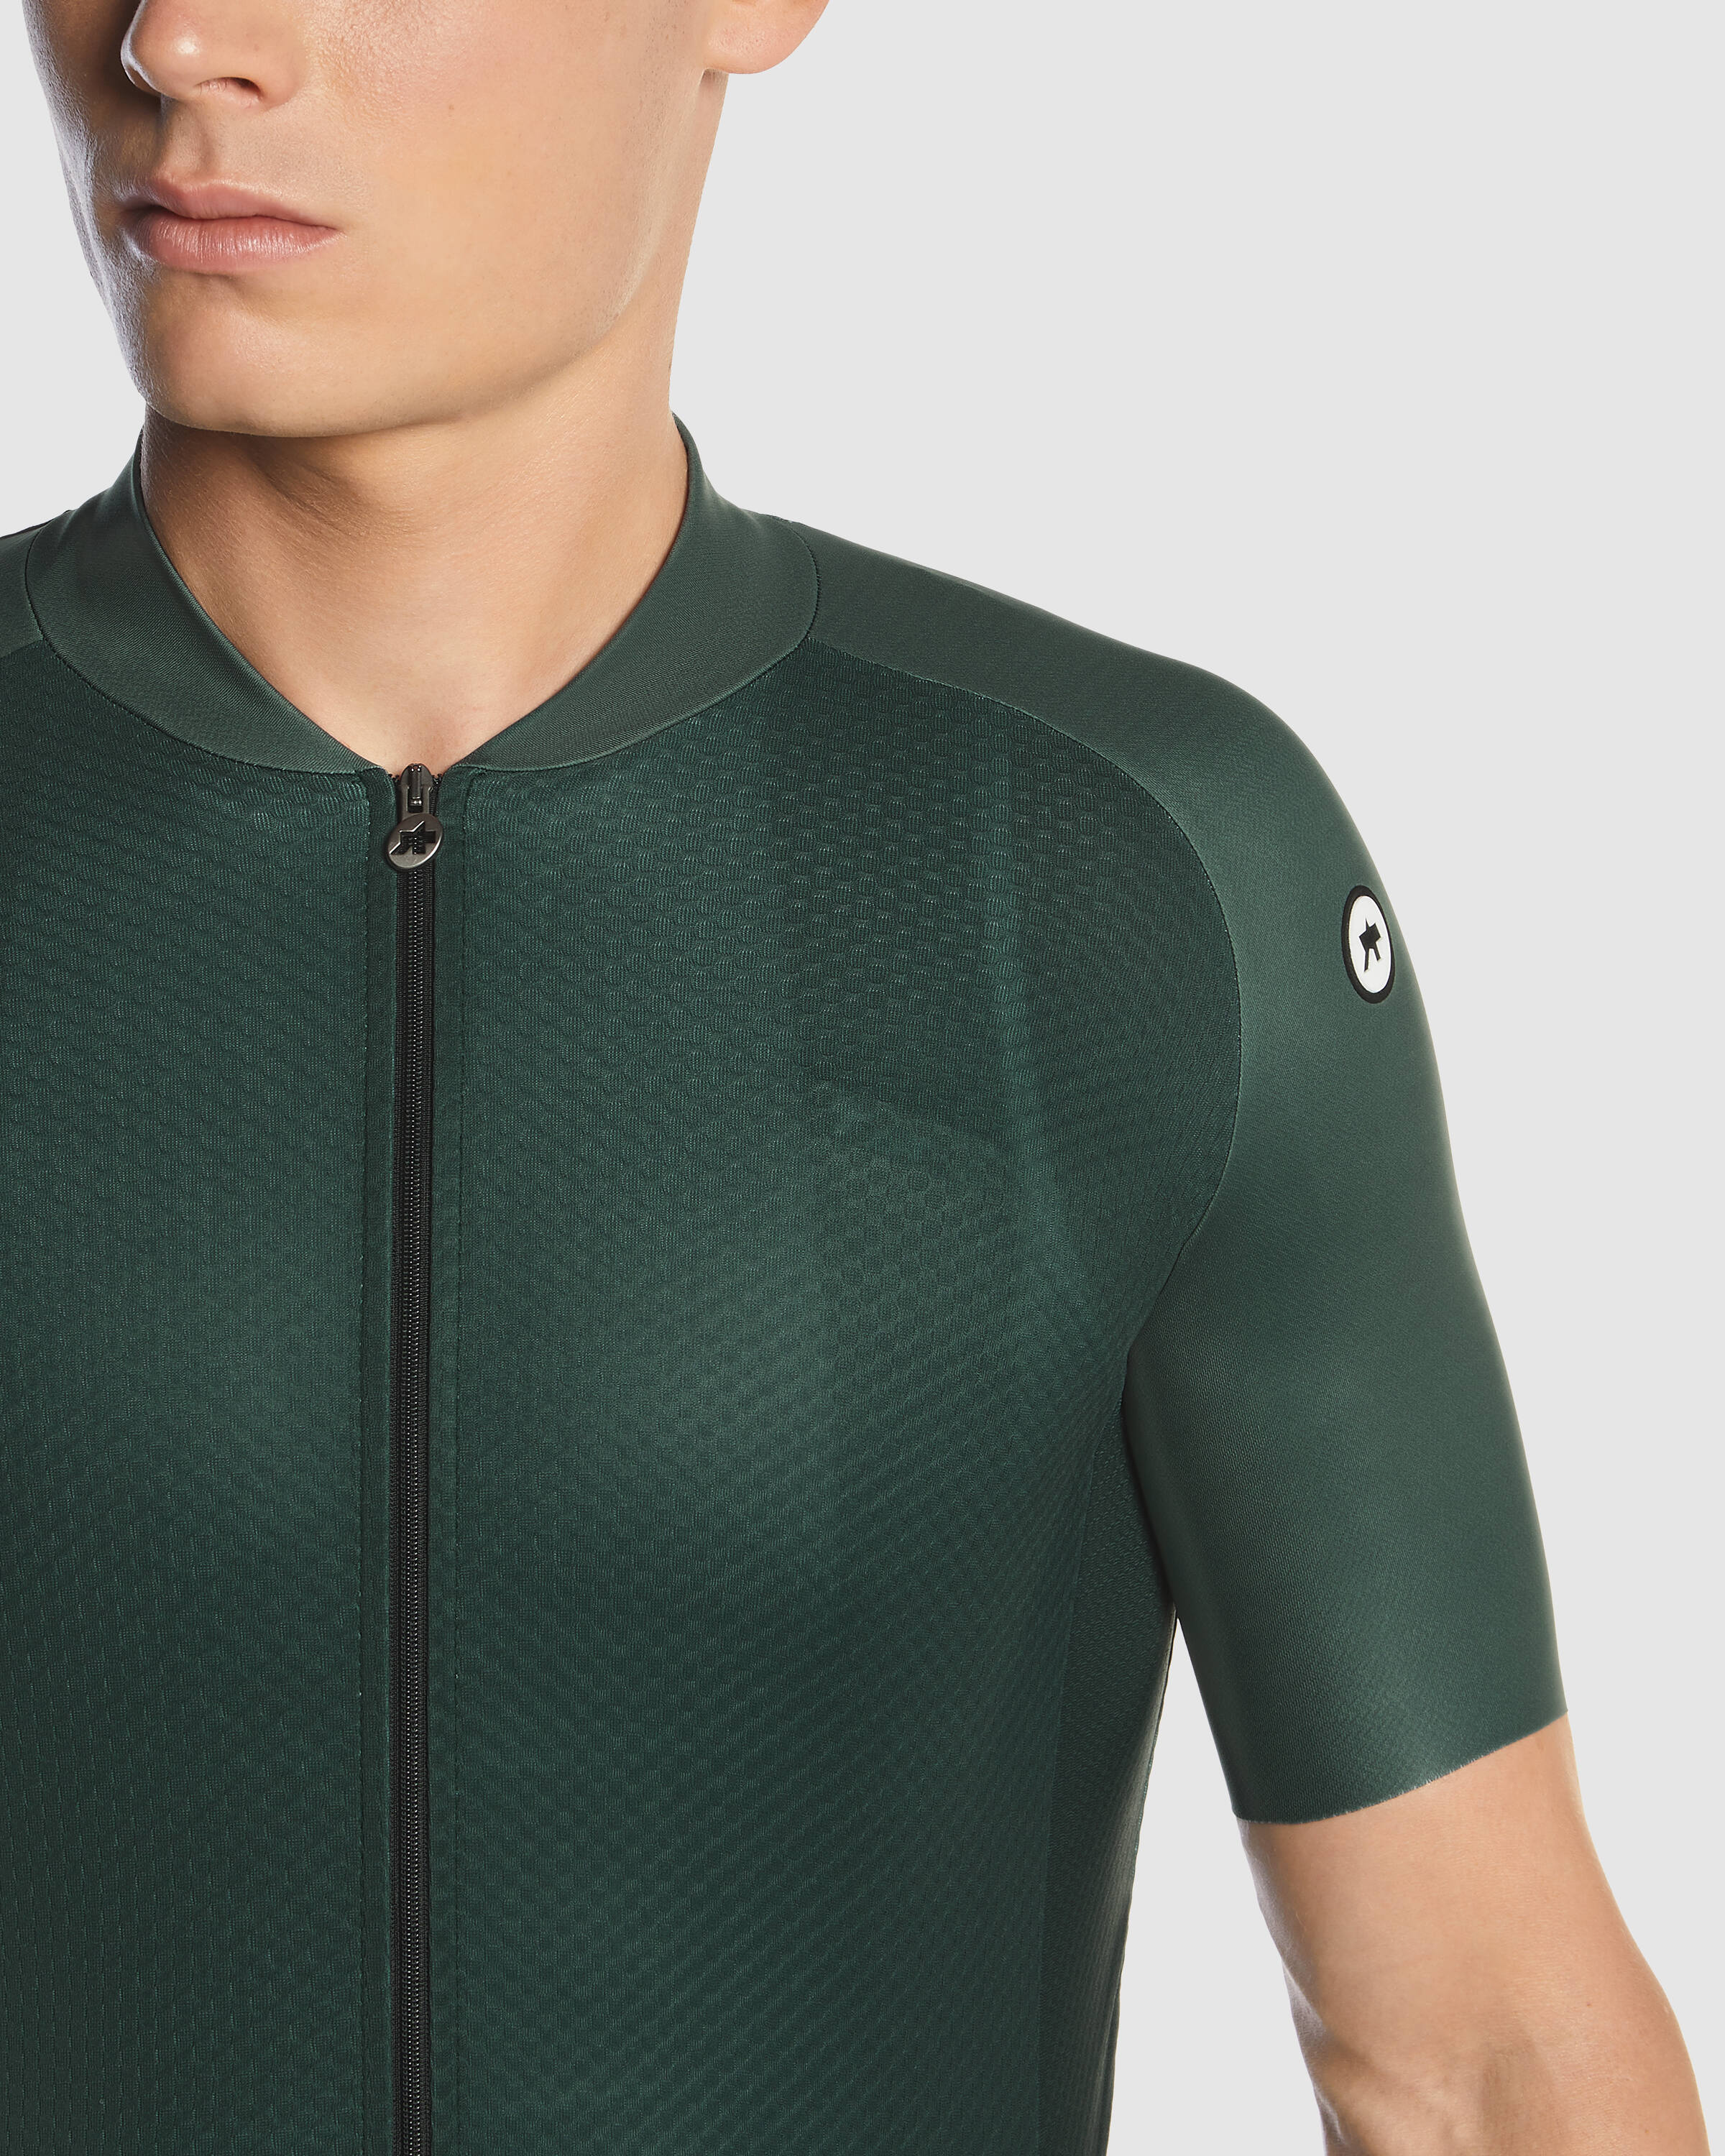 MILLE GT Jersey C2 EVO - ASSOS Of Switzerland - Official Outlet